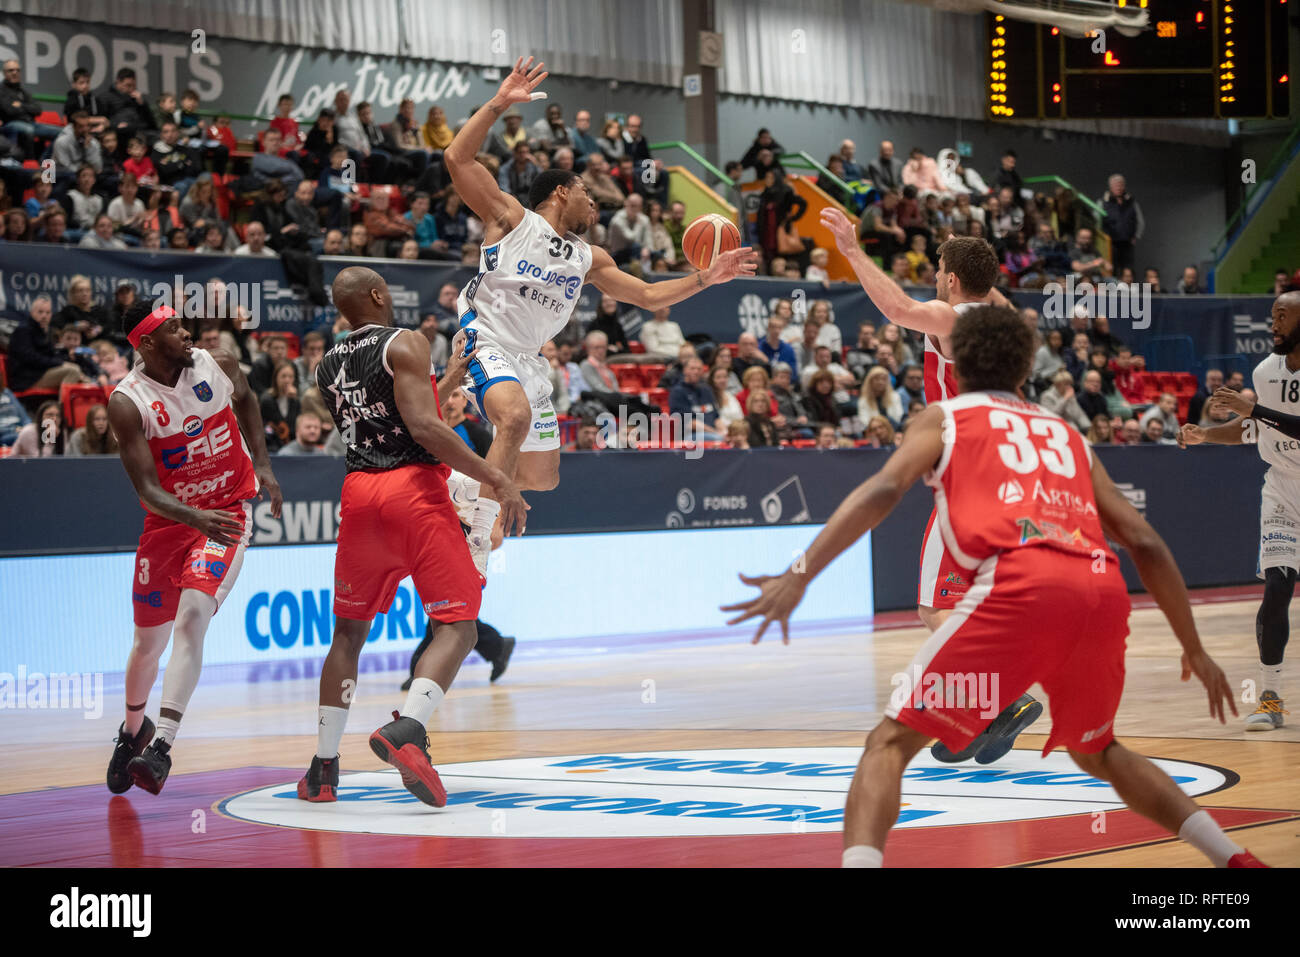 Montreux, Switzerland. 26th Jan, 2019. Final Four OF THE SWISS BASKET  LEAGUE (SBL) CUP 2019 FRIBOURG OLYMPIC VS SAM MASSAGNO-Fribourg Olympic Vs  Sam Massagno at the Pierrier staduim in Montreux in Switzerland, (